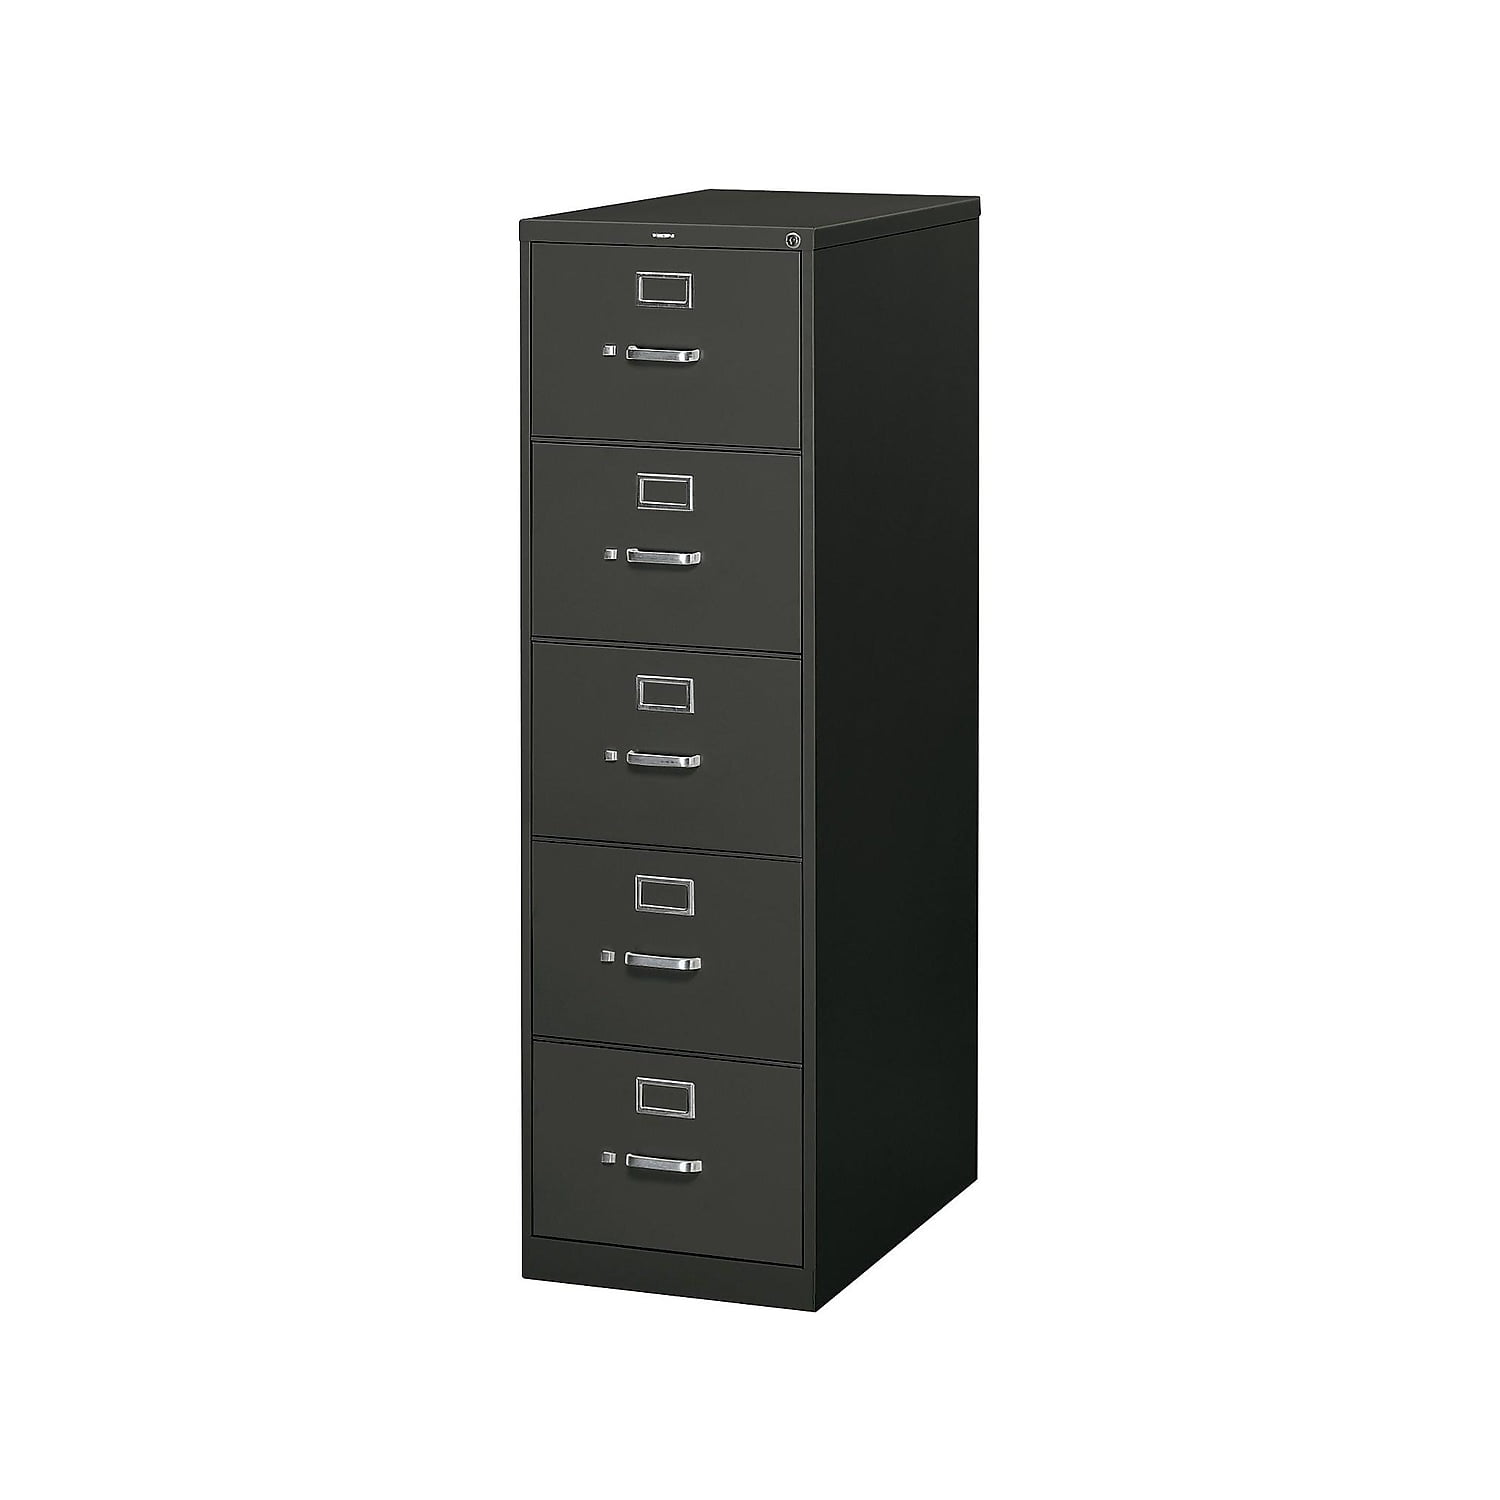 5-Drawer Letter Deluxe File Cabinet with Lock SGN-526L, Metal File Cabinets